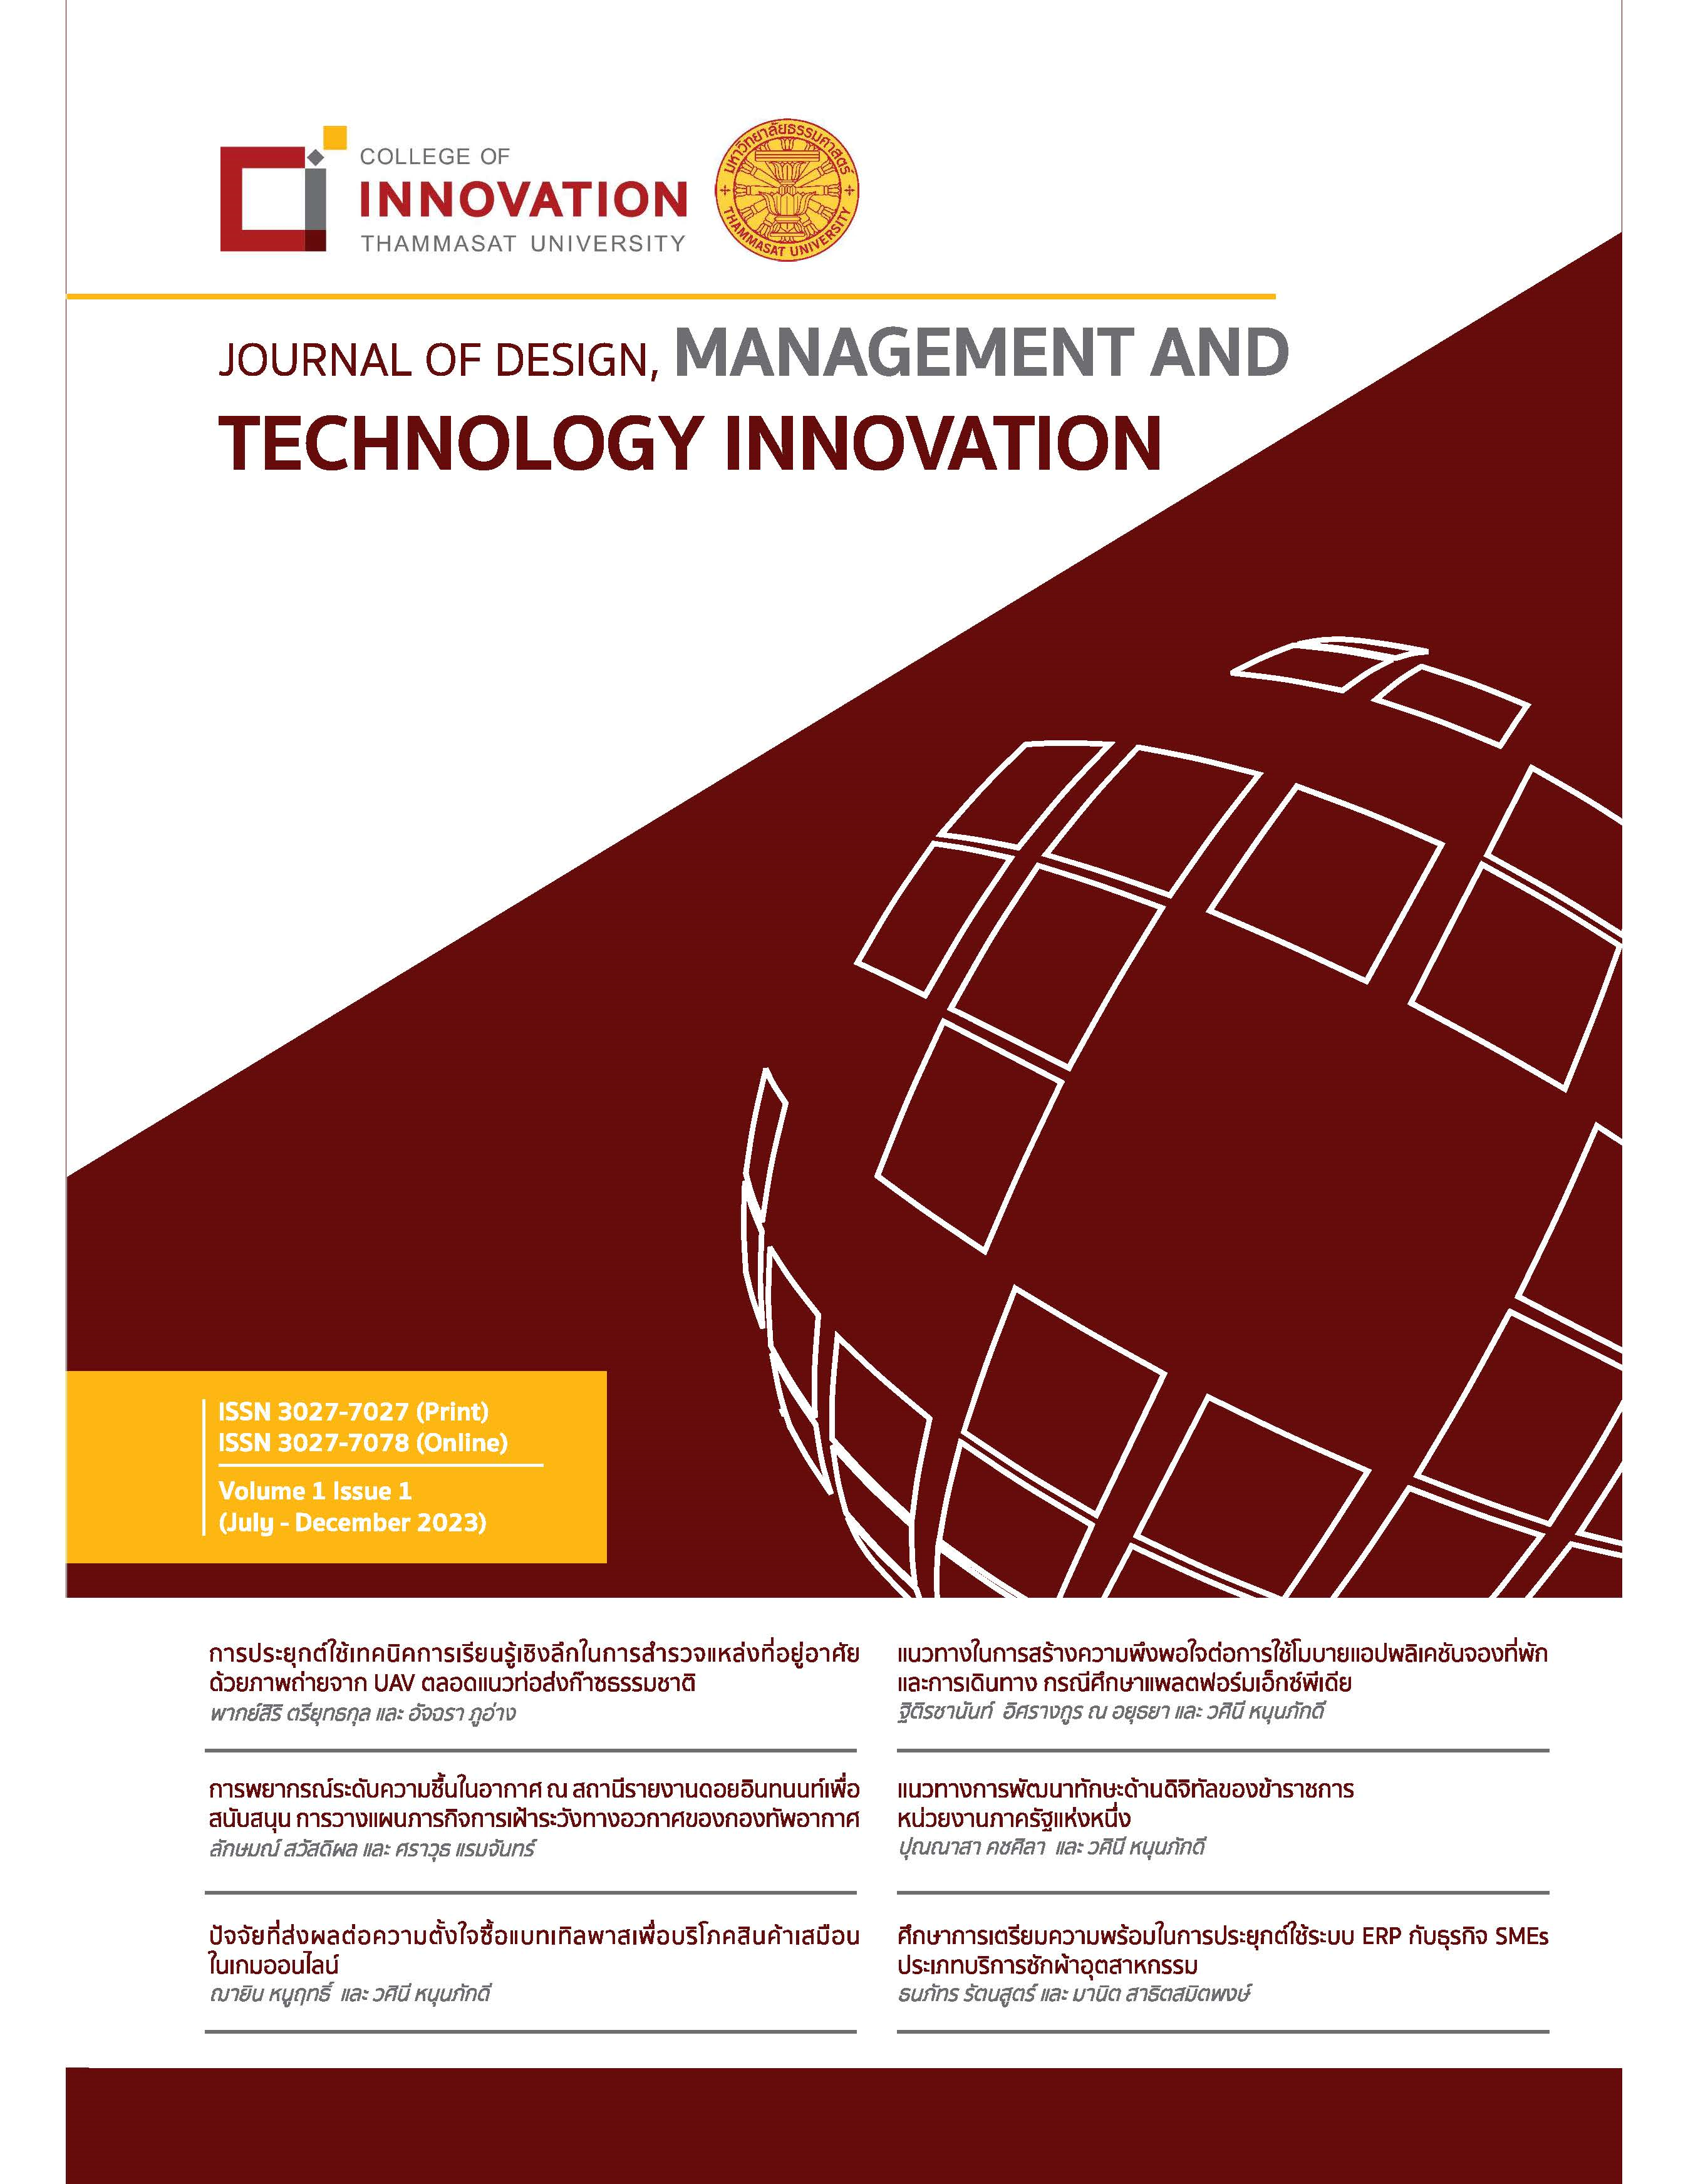 					View Vol. 1 No. 1 (2023): Journal of Design, Management and Technology Innovation, July - December, 2023
				